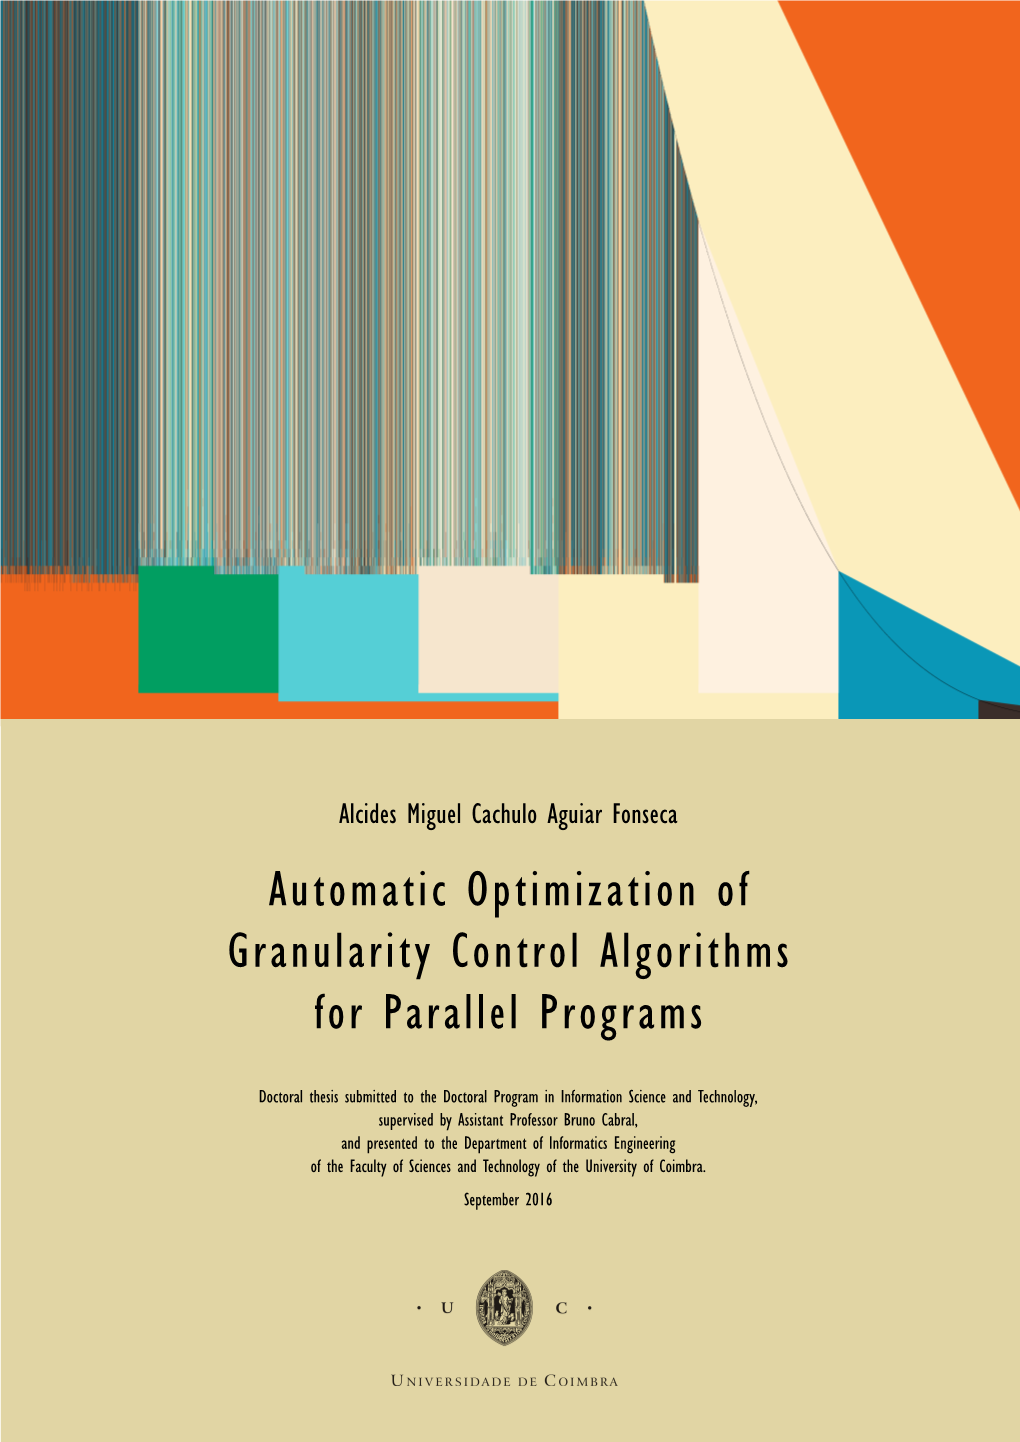 Automatic Optimization of Granularity Control Algorithms for Parallel Programs